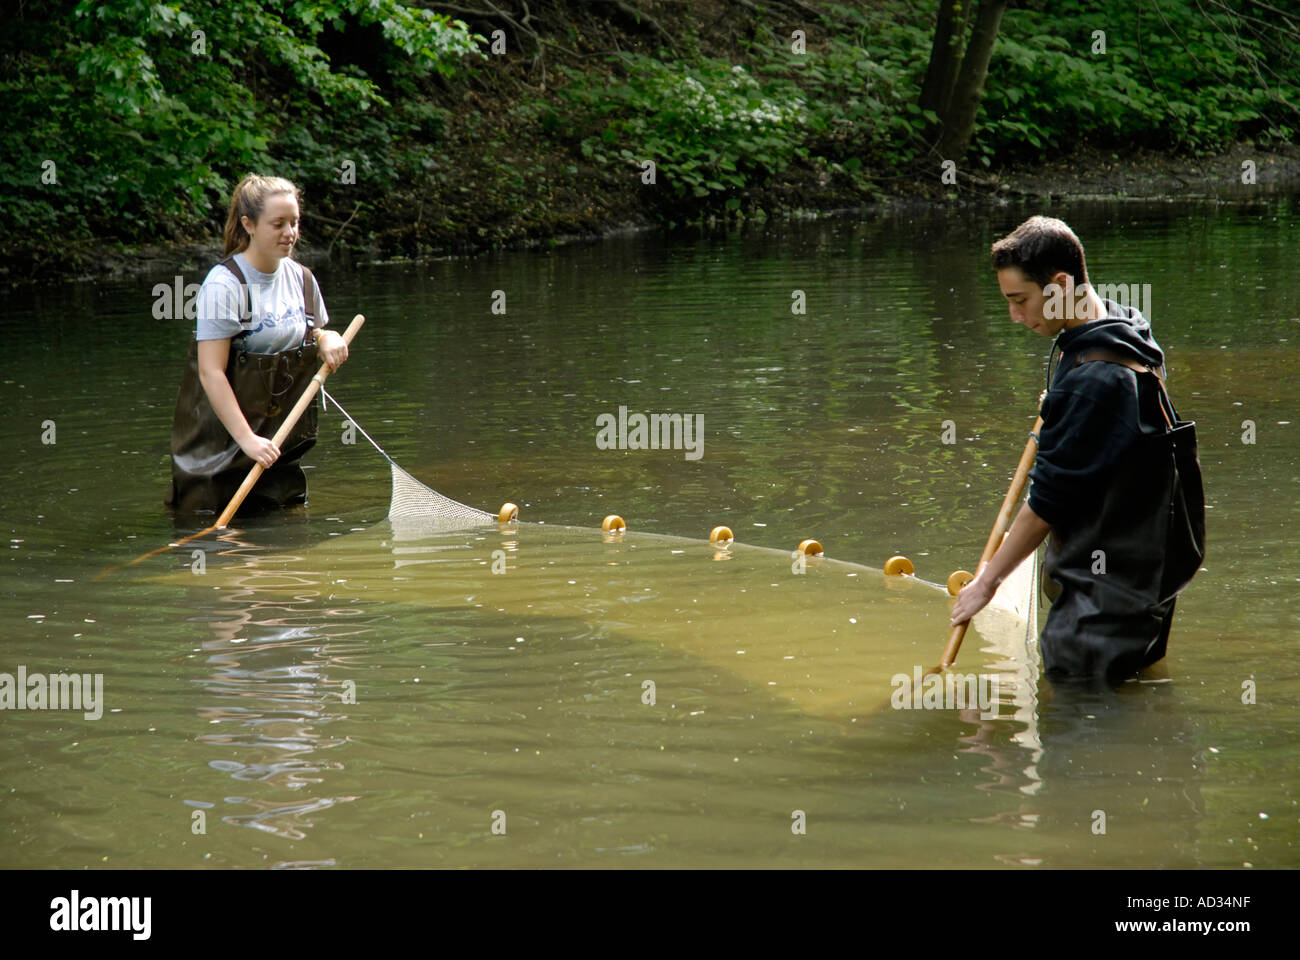 Teenage boy and girl using seine net to sample catch river fish Stock Photo